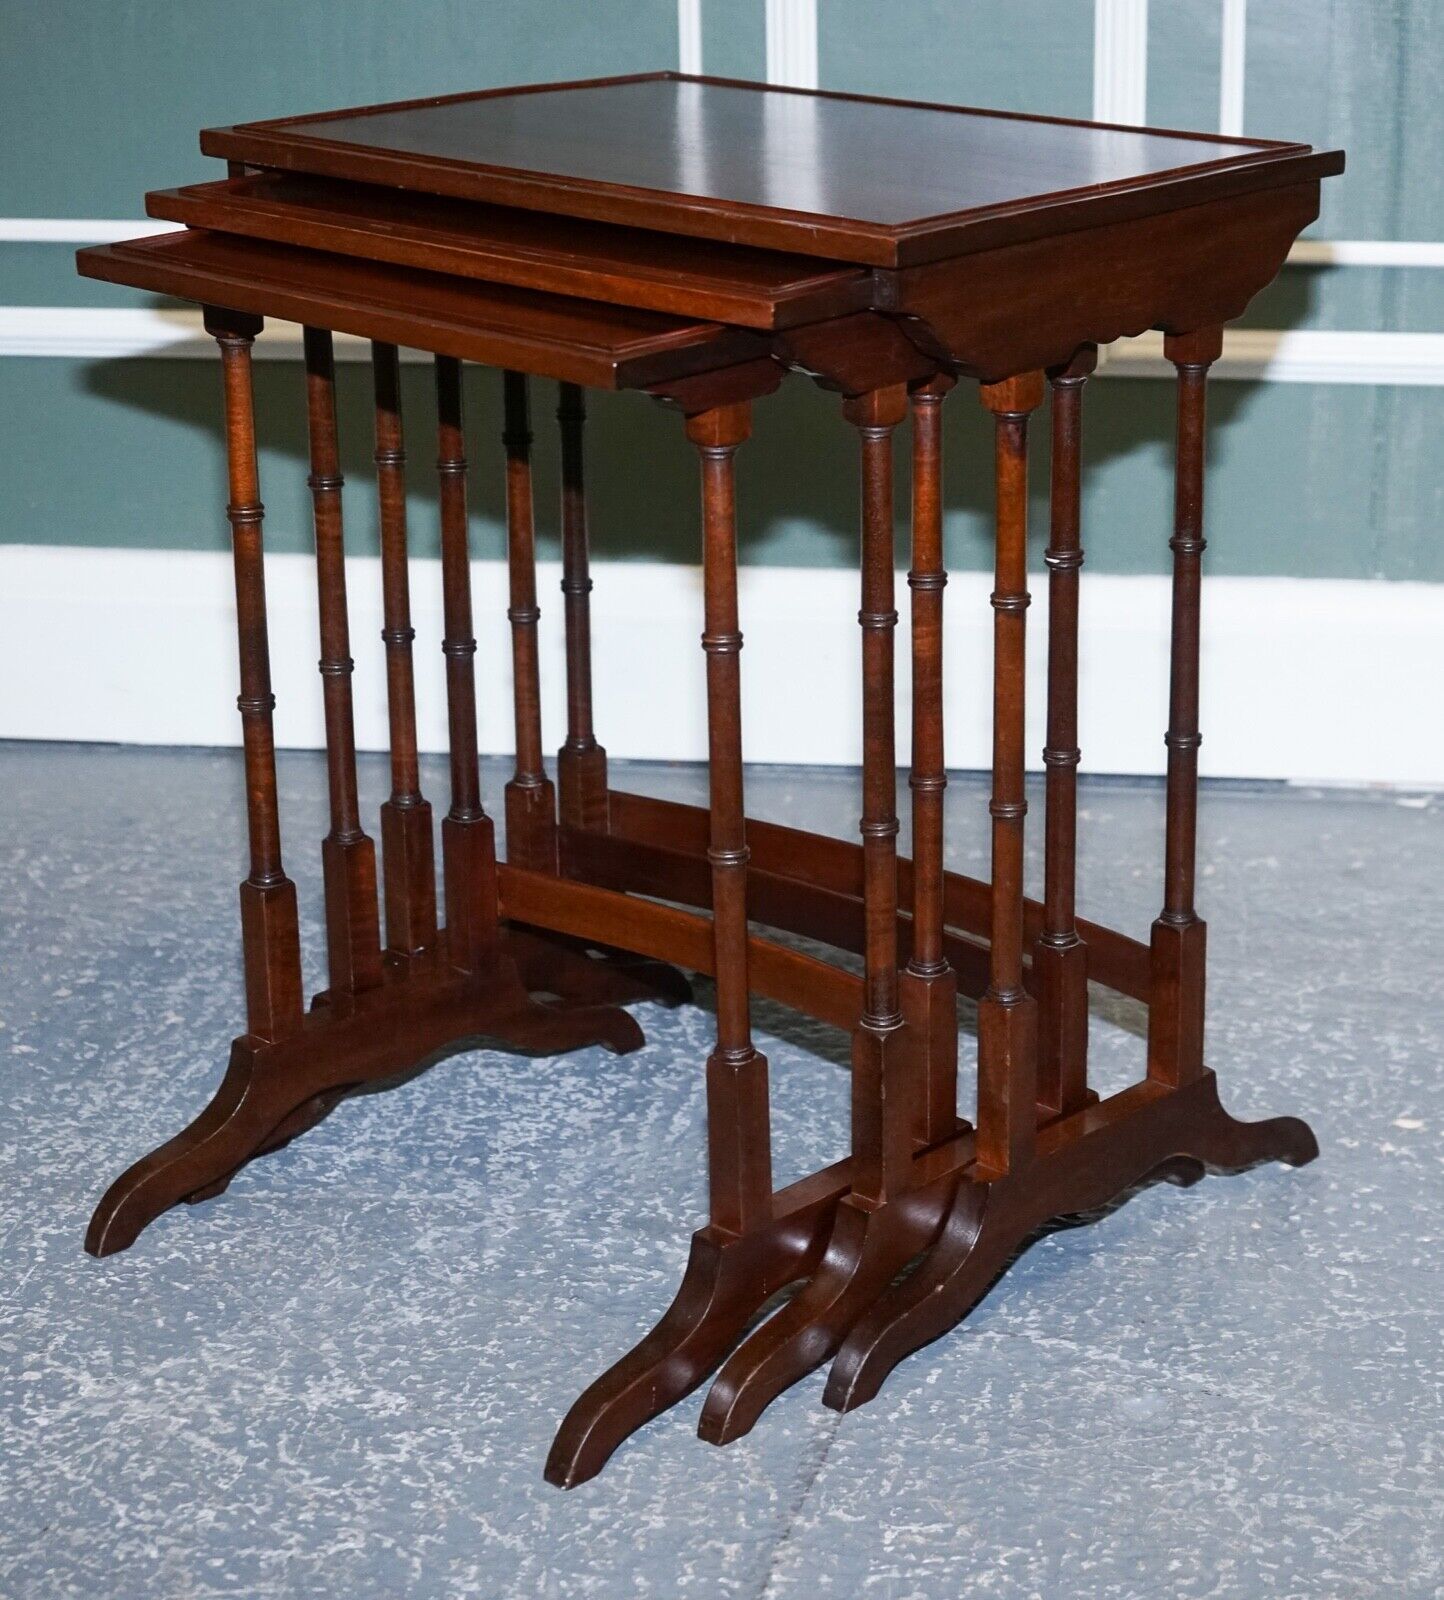 GEORGIAN NEST OF FOUR NESTING TABLES SIDE TABLES WITH BAMBOO LEGS